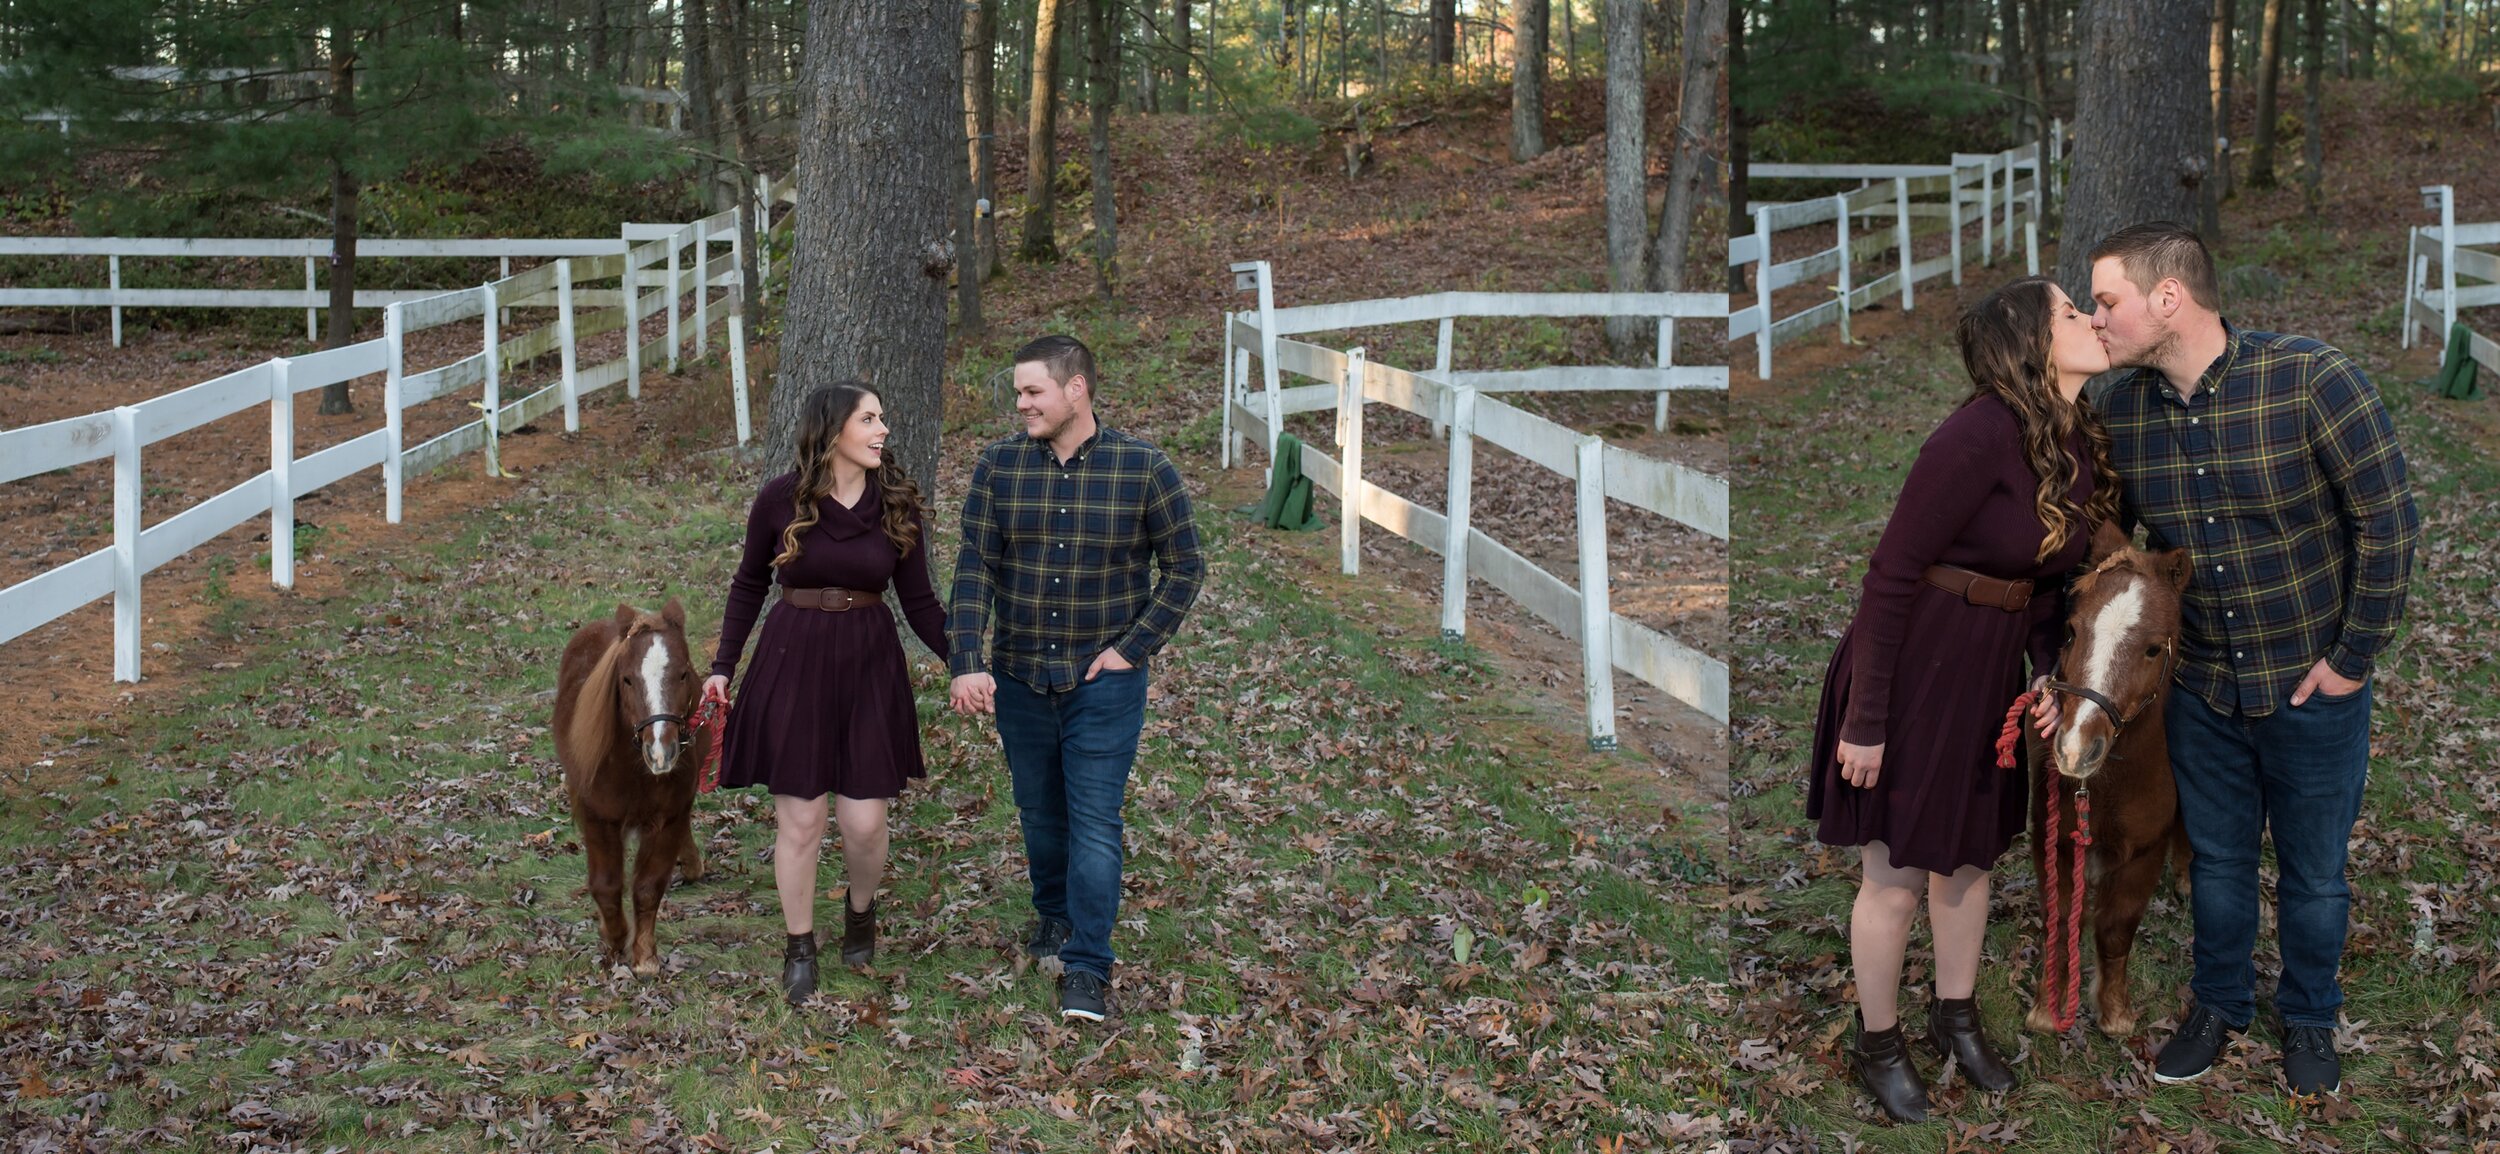 Maureen Russell Photography - Wrentham MA Fall Engagement Session_0002.jpg